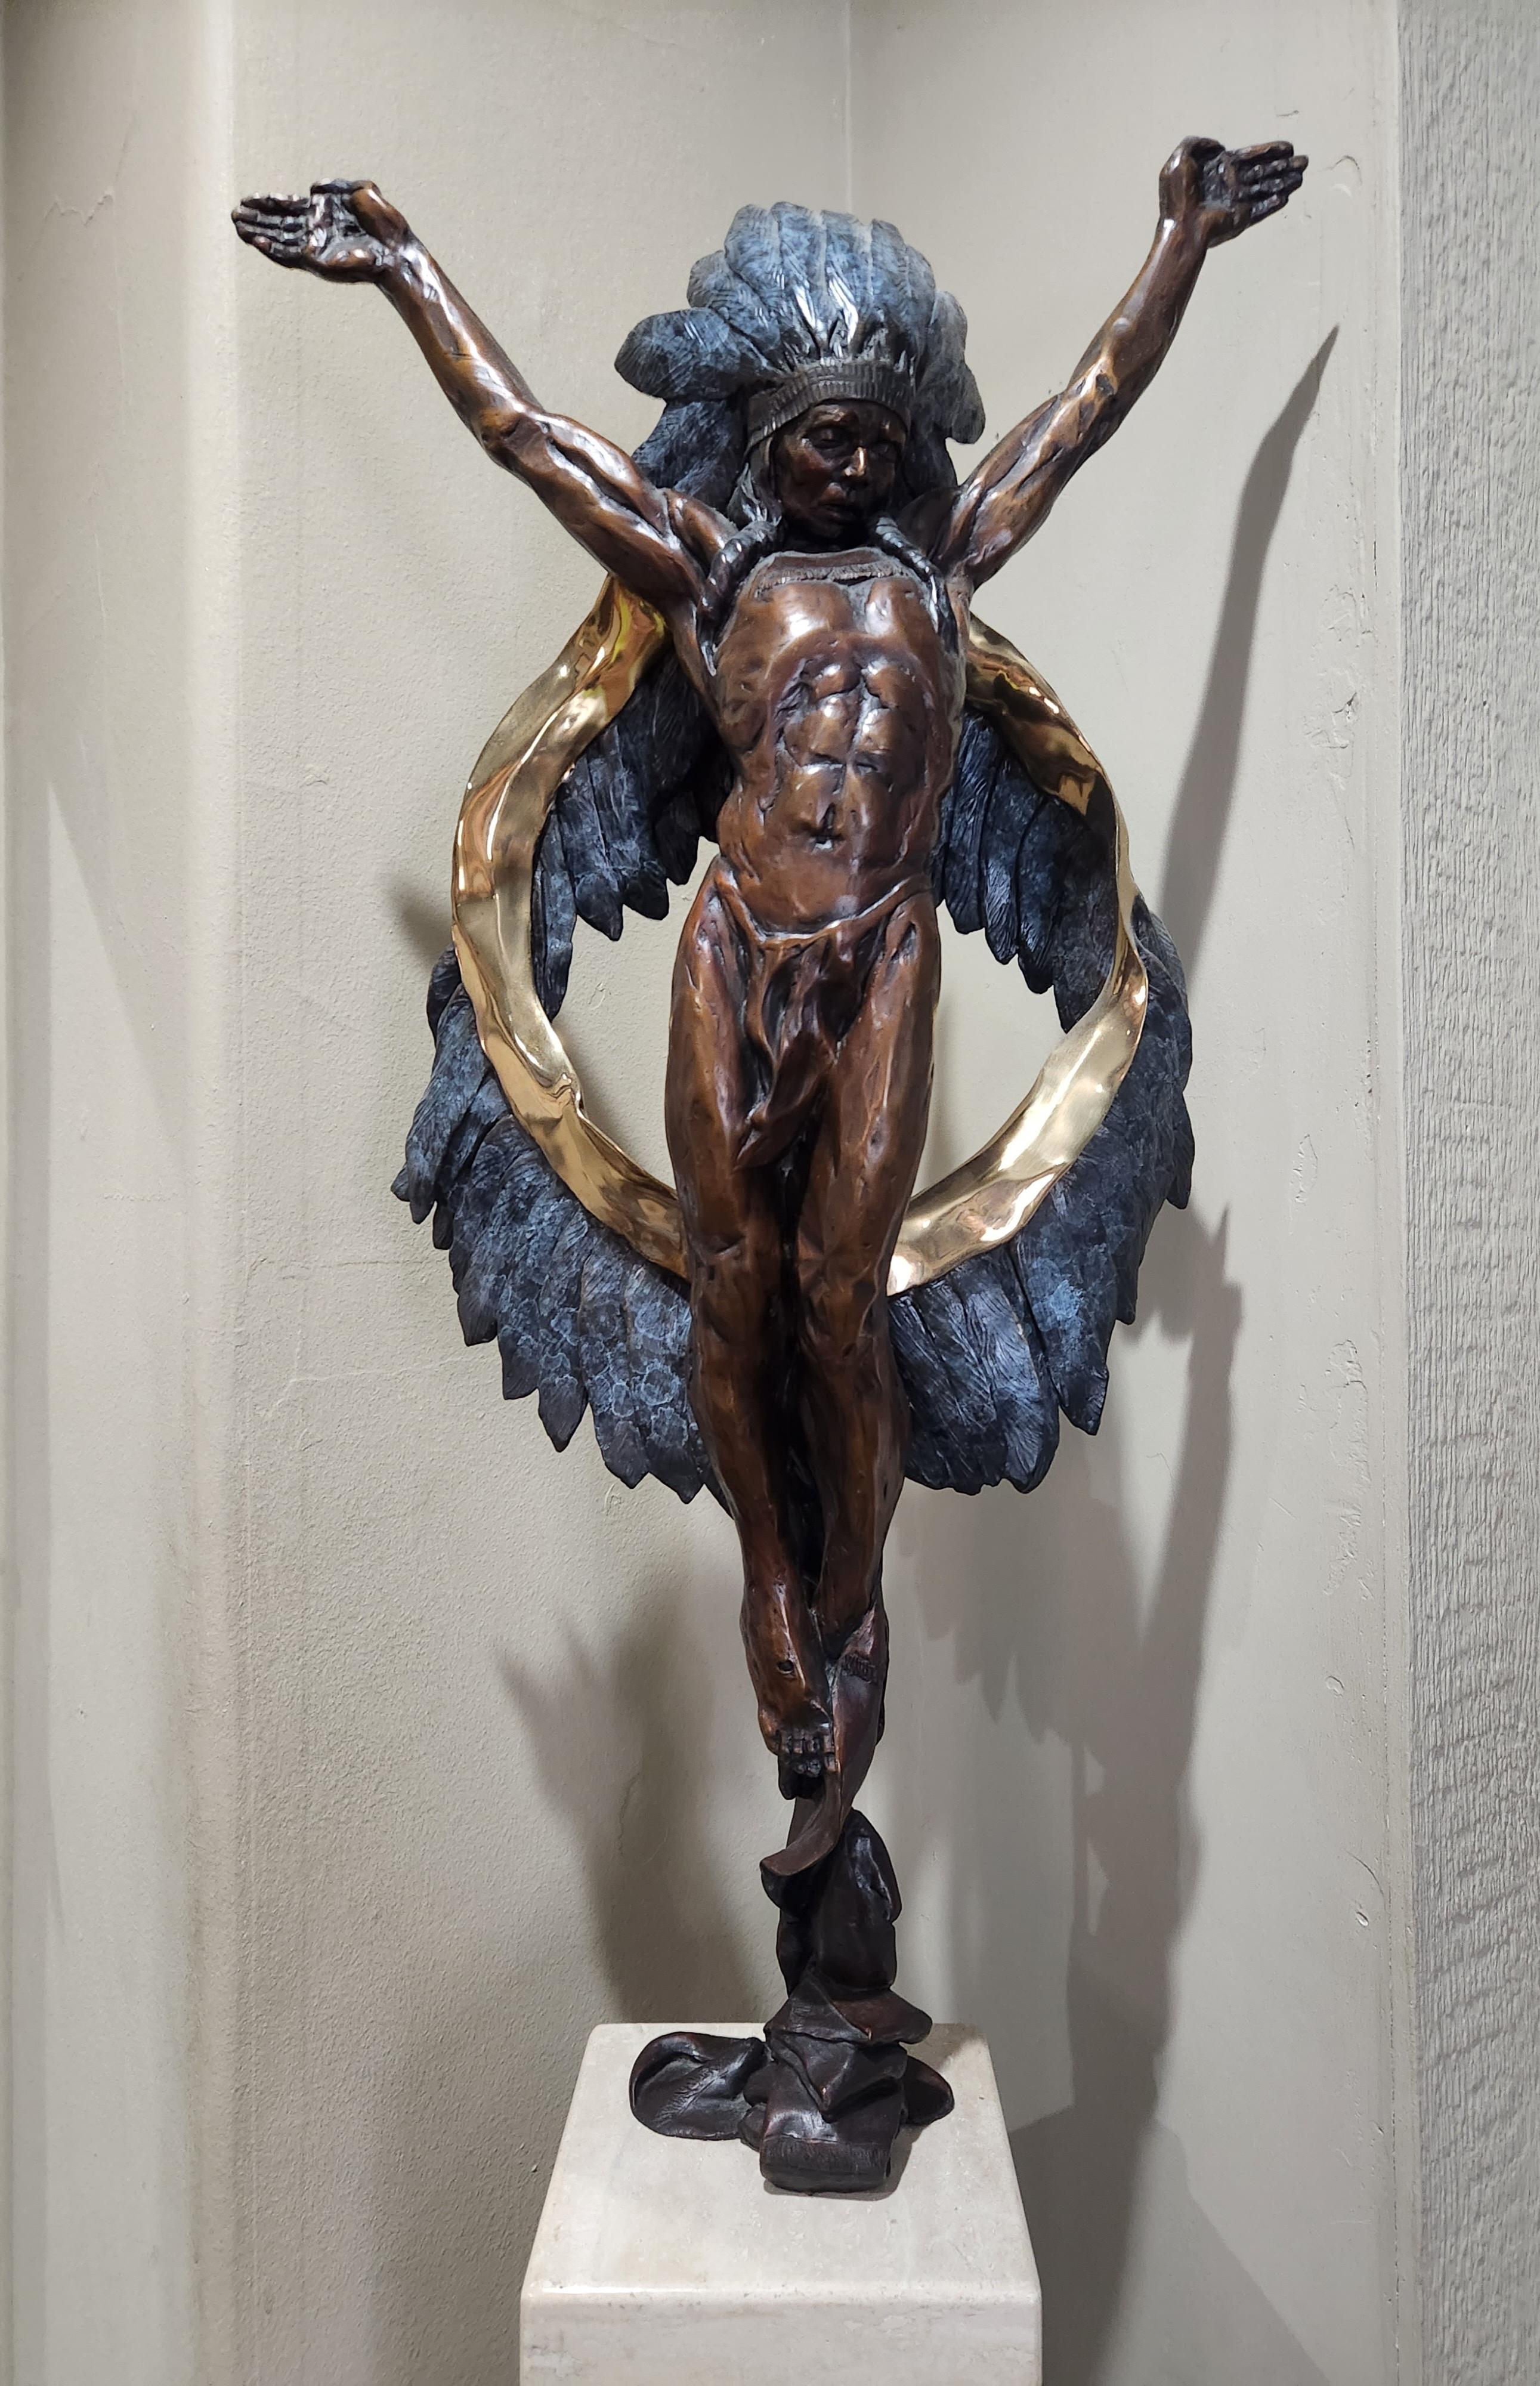 Committed - 38" tall bronze sculpture - Sculpture by Denny Haskew